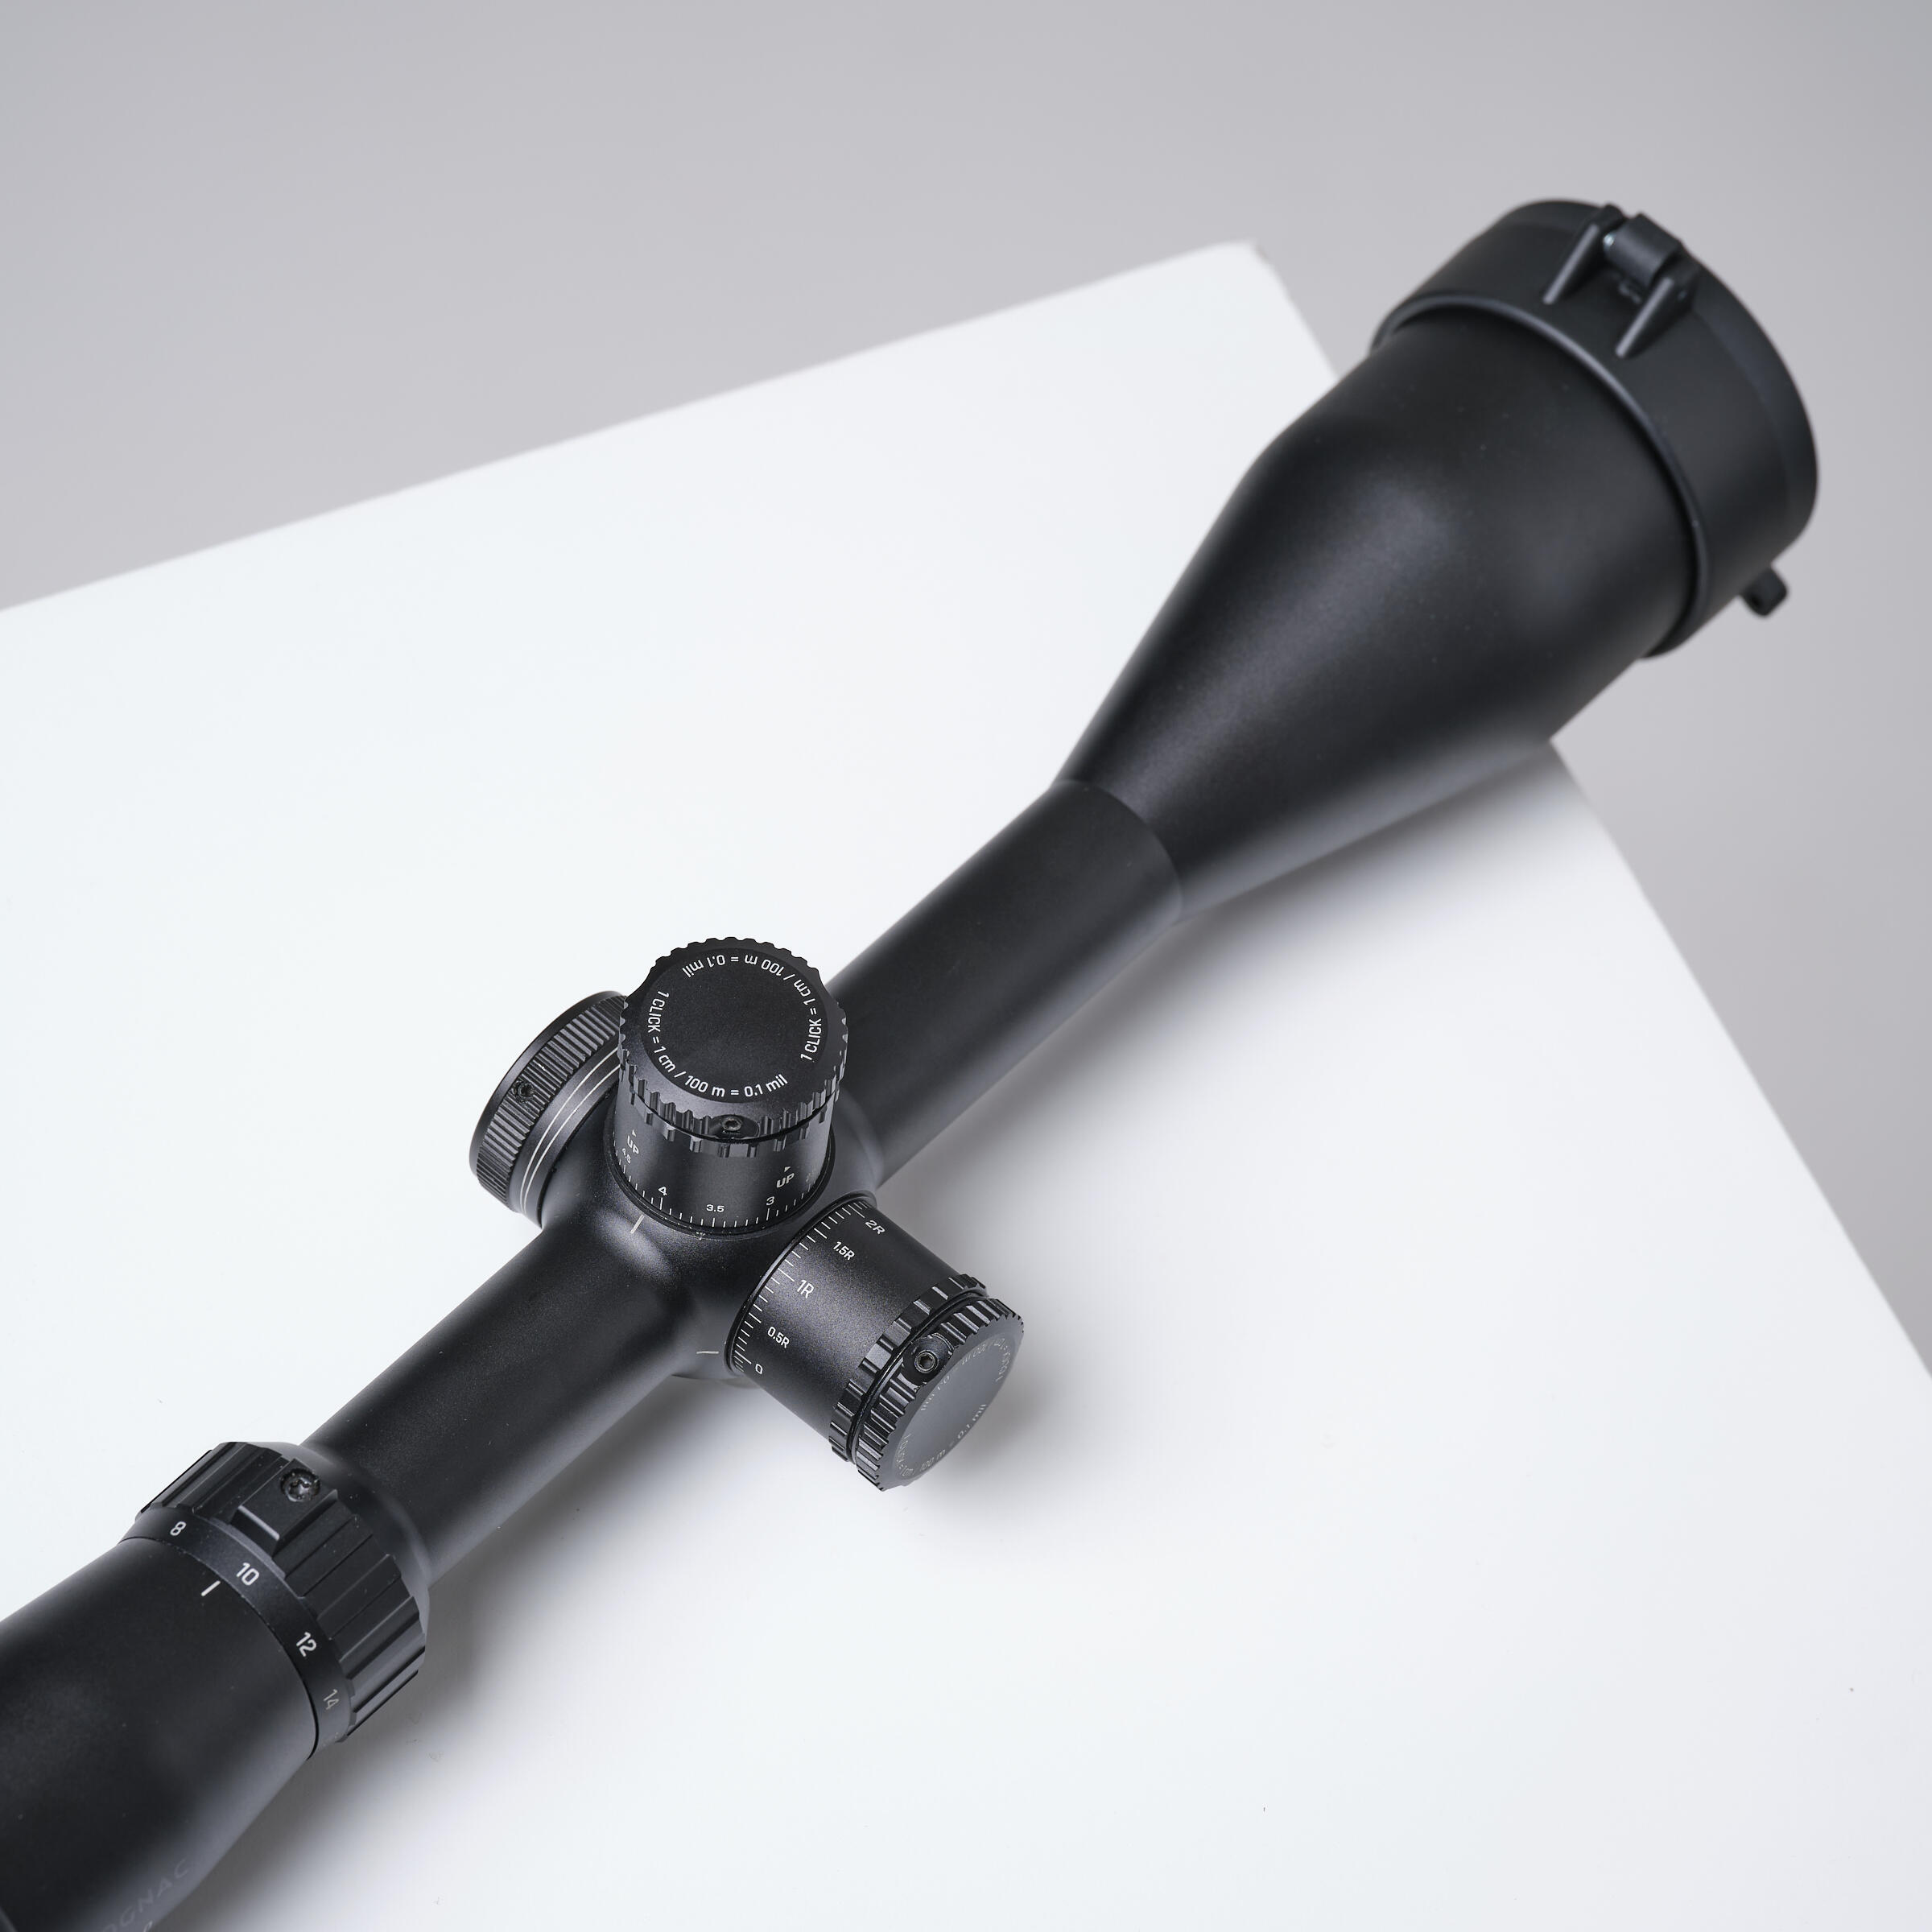 SCOPE 4-16X50 with adjustable parallax 9/11